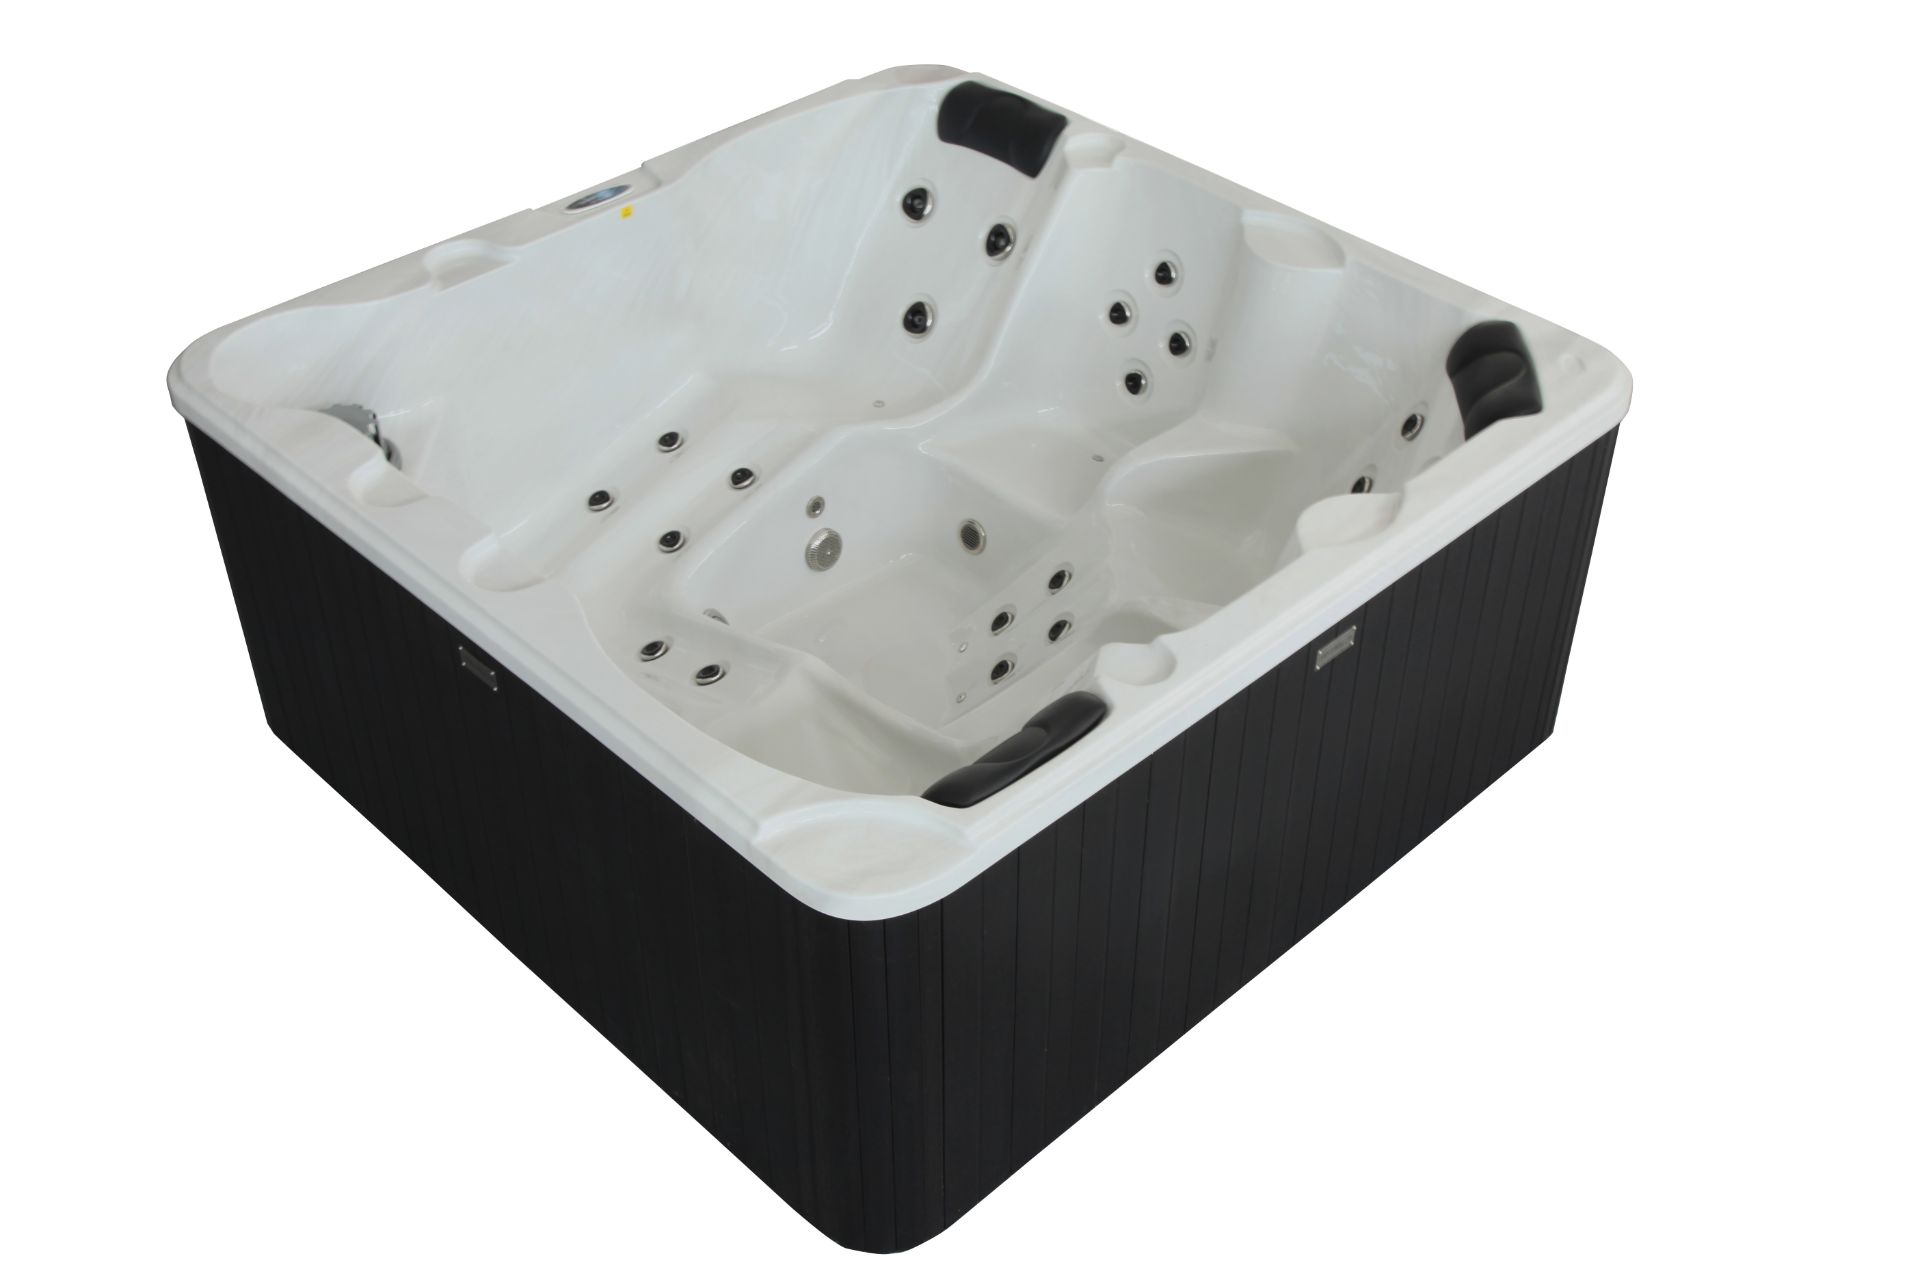 HIGH QUALITY NEW PACKAGED 2015 HOT TUB, MATCHING STEPS, SIDE, INSULATING COVER, TOP USA RUNNING GEAR - Image 6 of 6